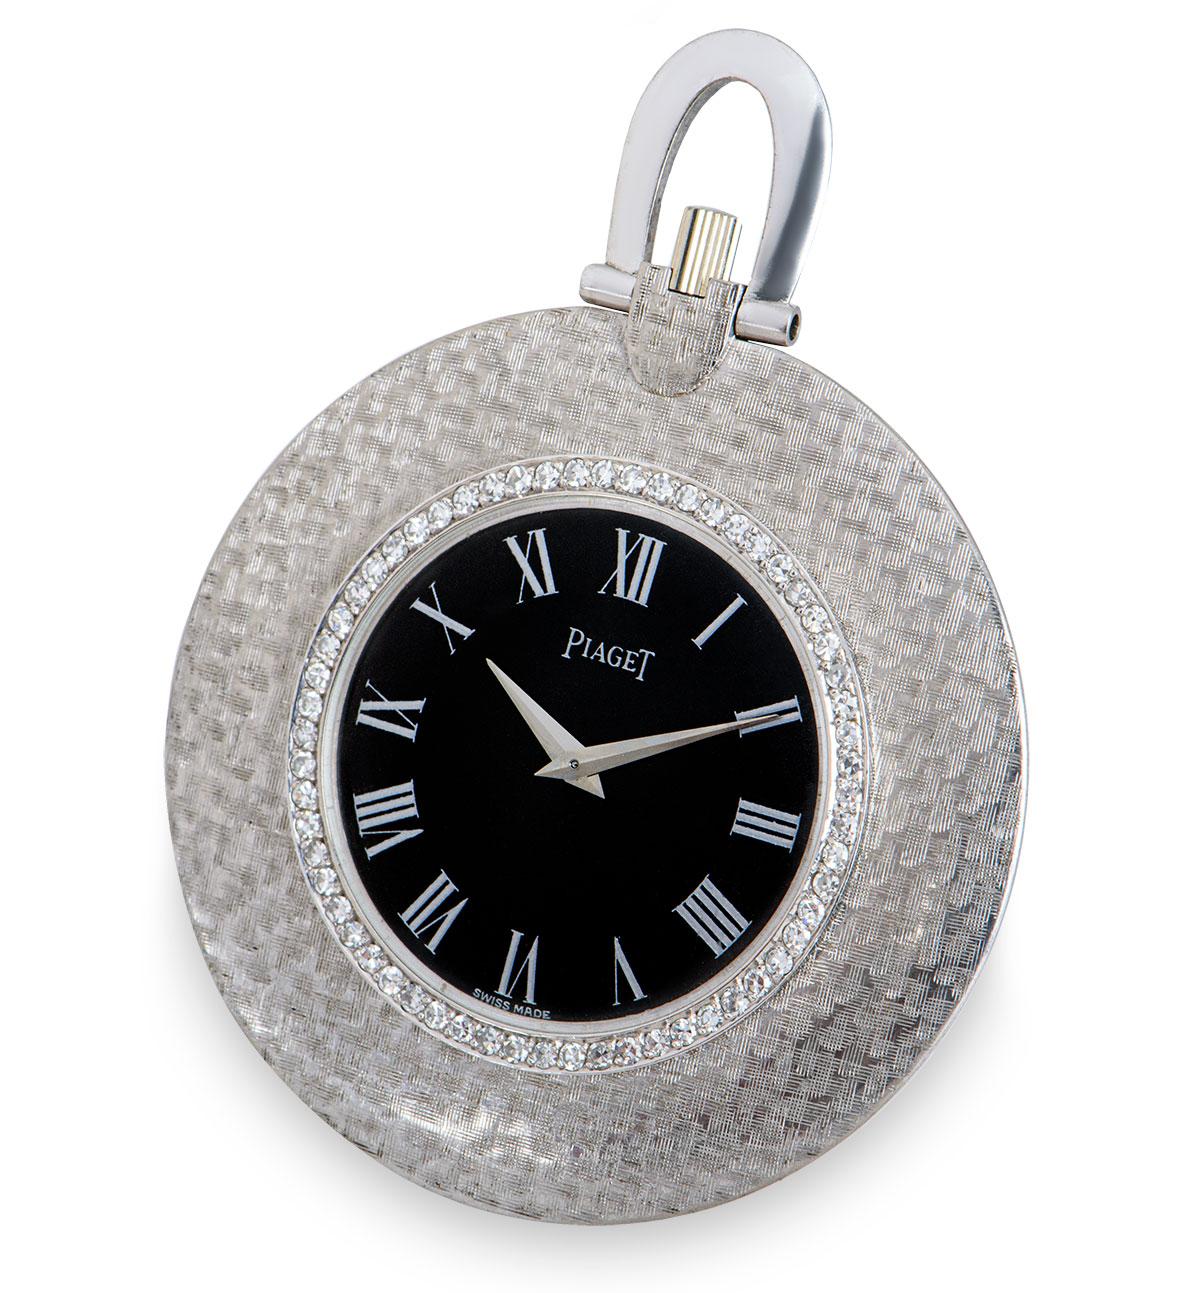 A 42 mm 18k White Gold Open Face Vintage Gents Dress Pocket Watch, black dial with roman numerals, a fixed 18k white gold textured bezel set with 60 round brilliant cut diamonds, an 18k white gold textured case, accompanied by a chain and fob,